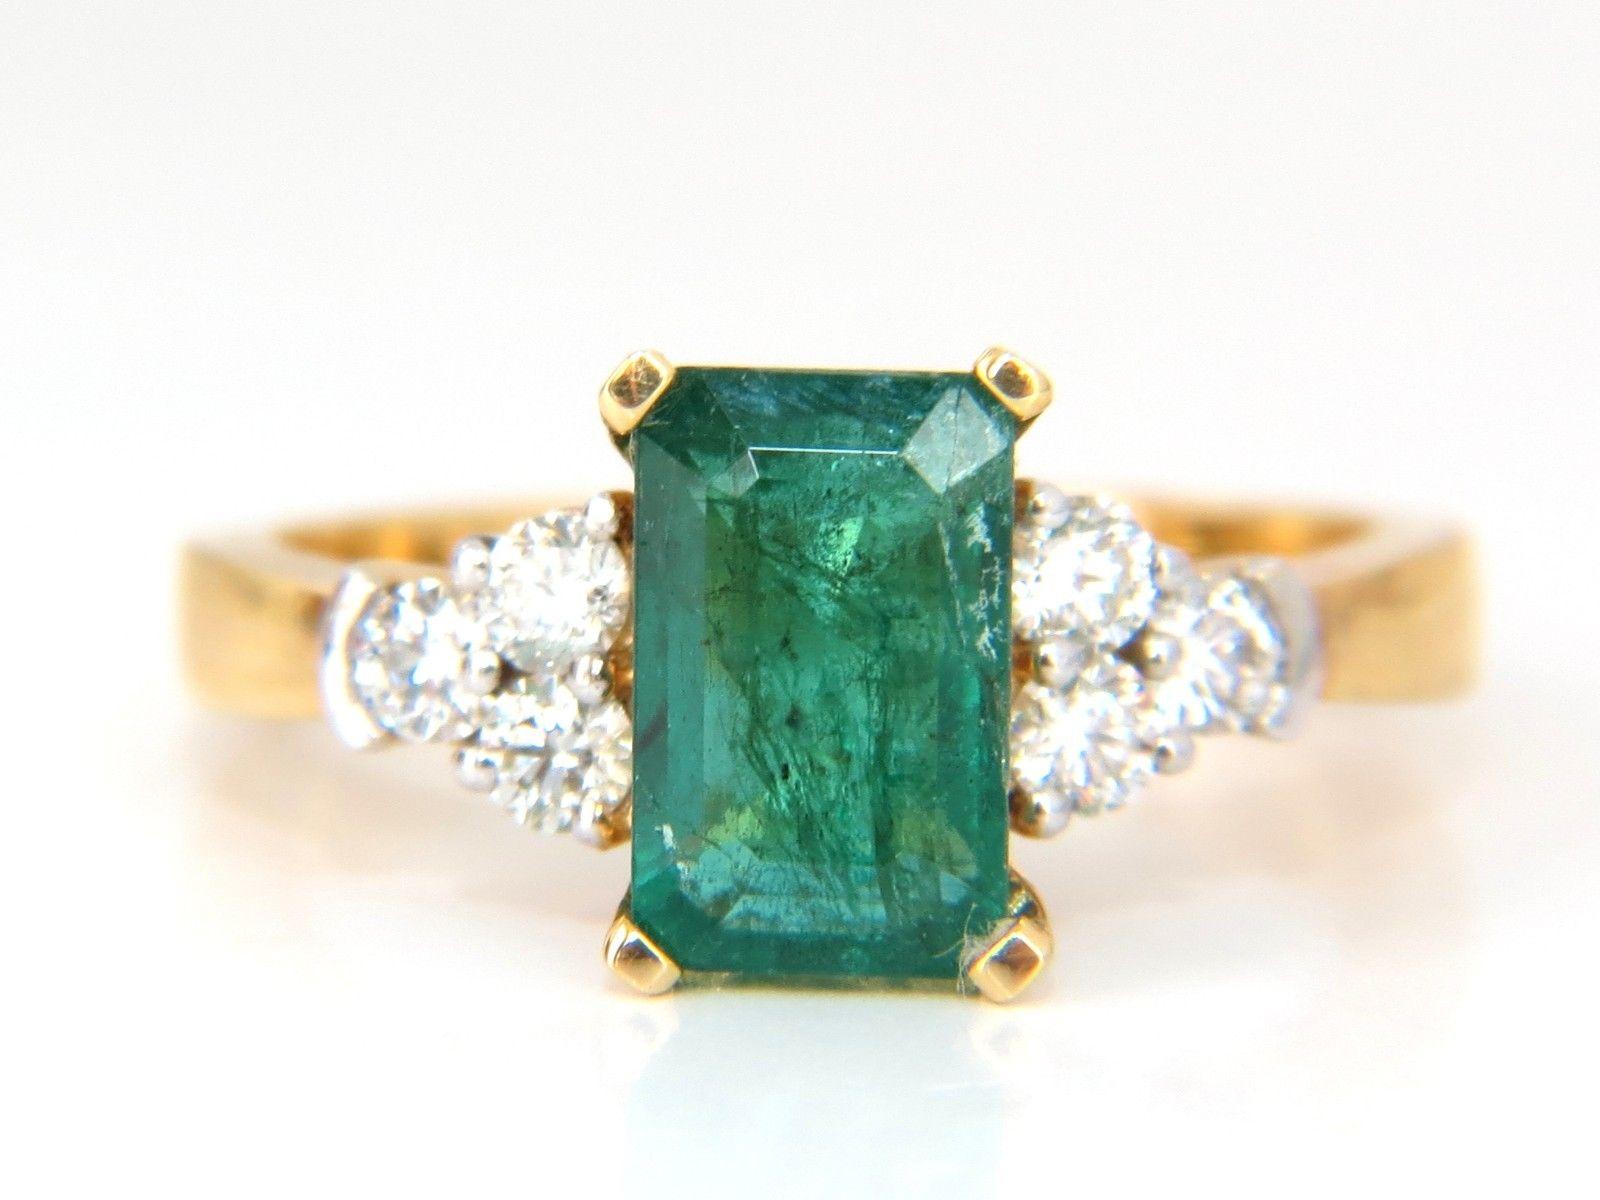 2.00ct. Natural emerald & .60ct. diamonds ring.

Emerald cut emerald, Excellent Clean Clarity

Brilliant Vivid Bright Green sparkles from all angles

Pristine Transparency

9.1 x 5.7mm 



.60cts of Side round cut diamonds: 

Vs-2 clarity